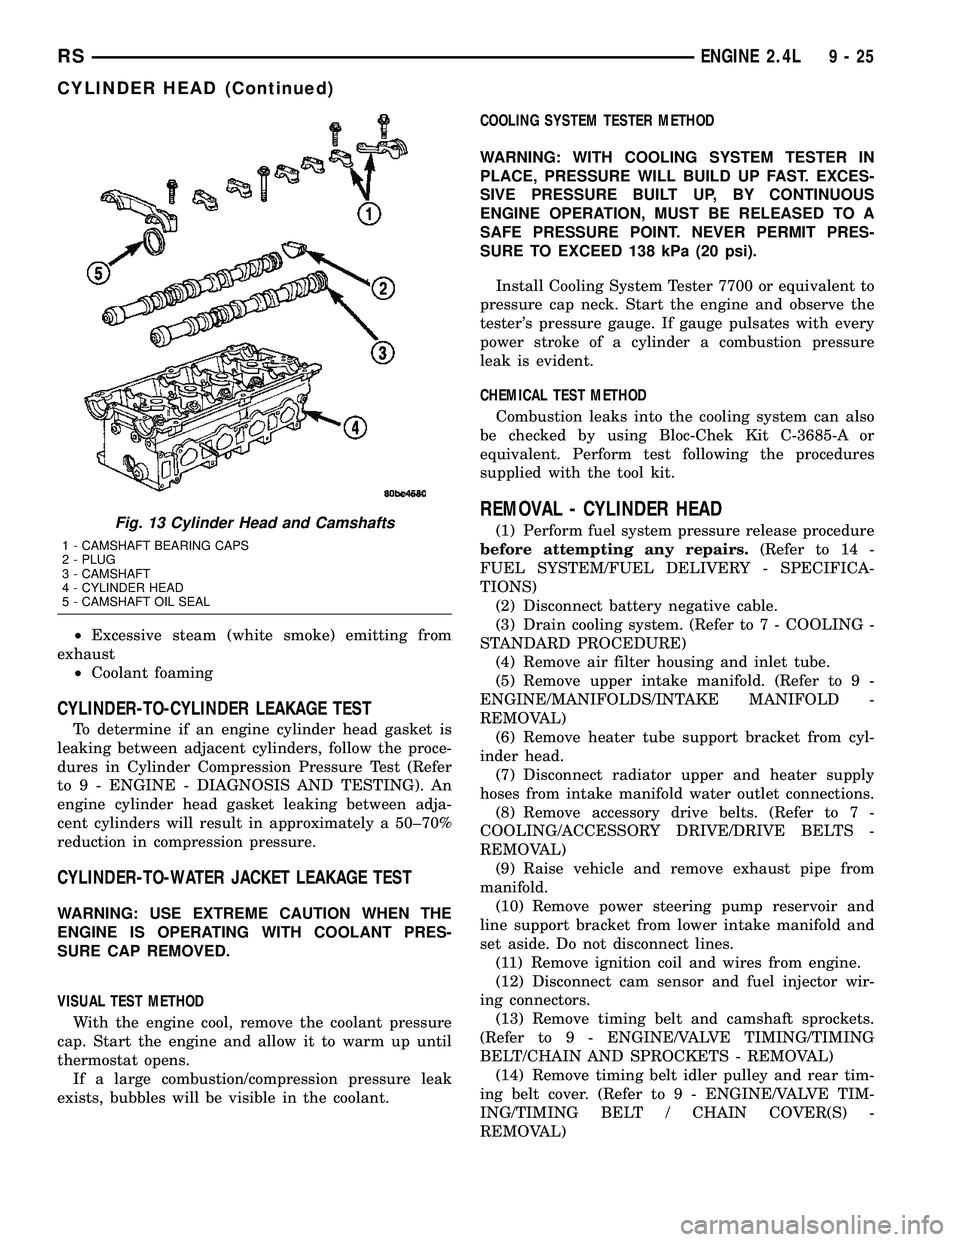 CHRYSLER VOYAGER 2004  Service Manual ²Excessive steam (white smoke) emitting from
exhaust
²Coolant foaming
CYLINDER-TO-CYLINDER LEAKAGE TEST
To determine if an engine cylinder head gasket is
leaking between adjacent cylinders, follow t